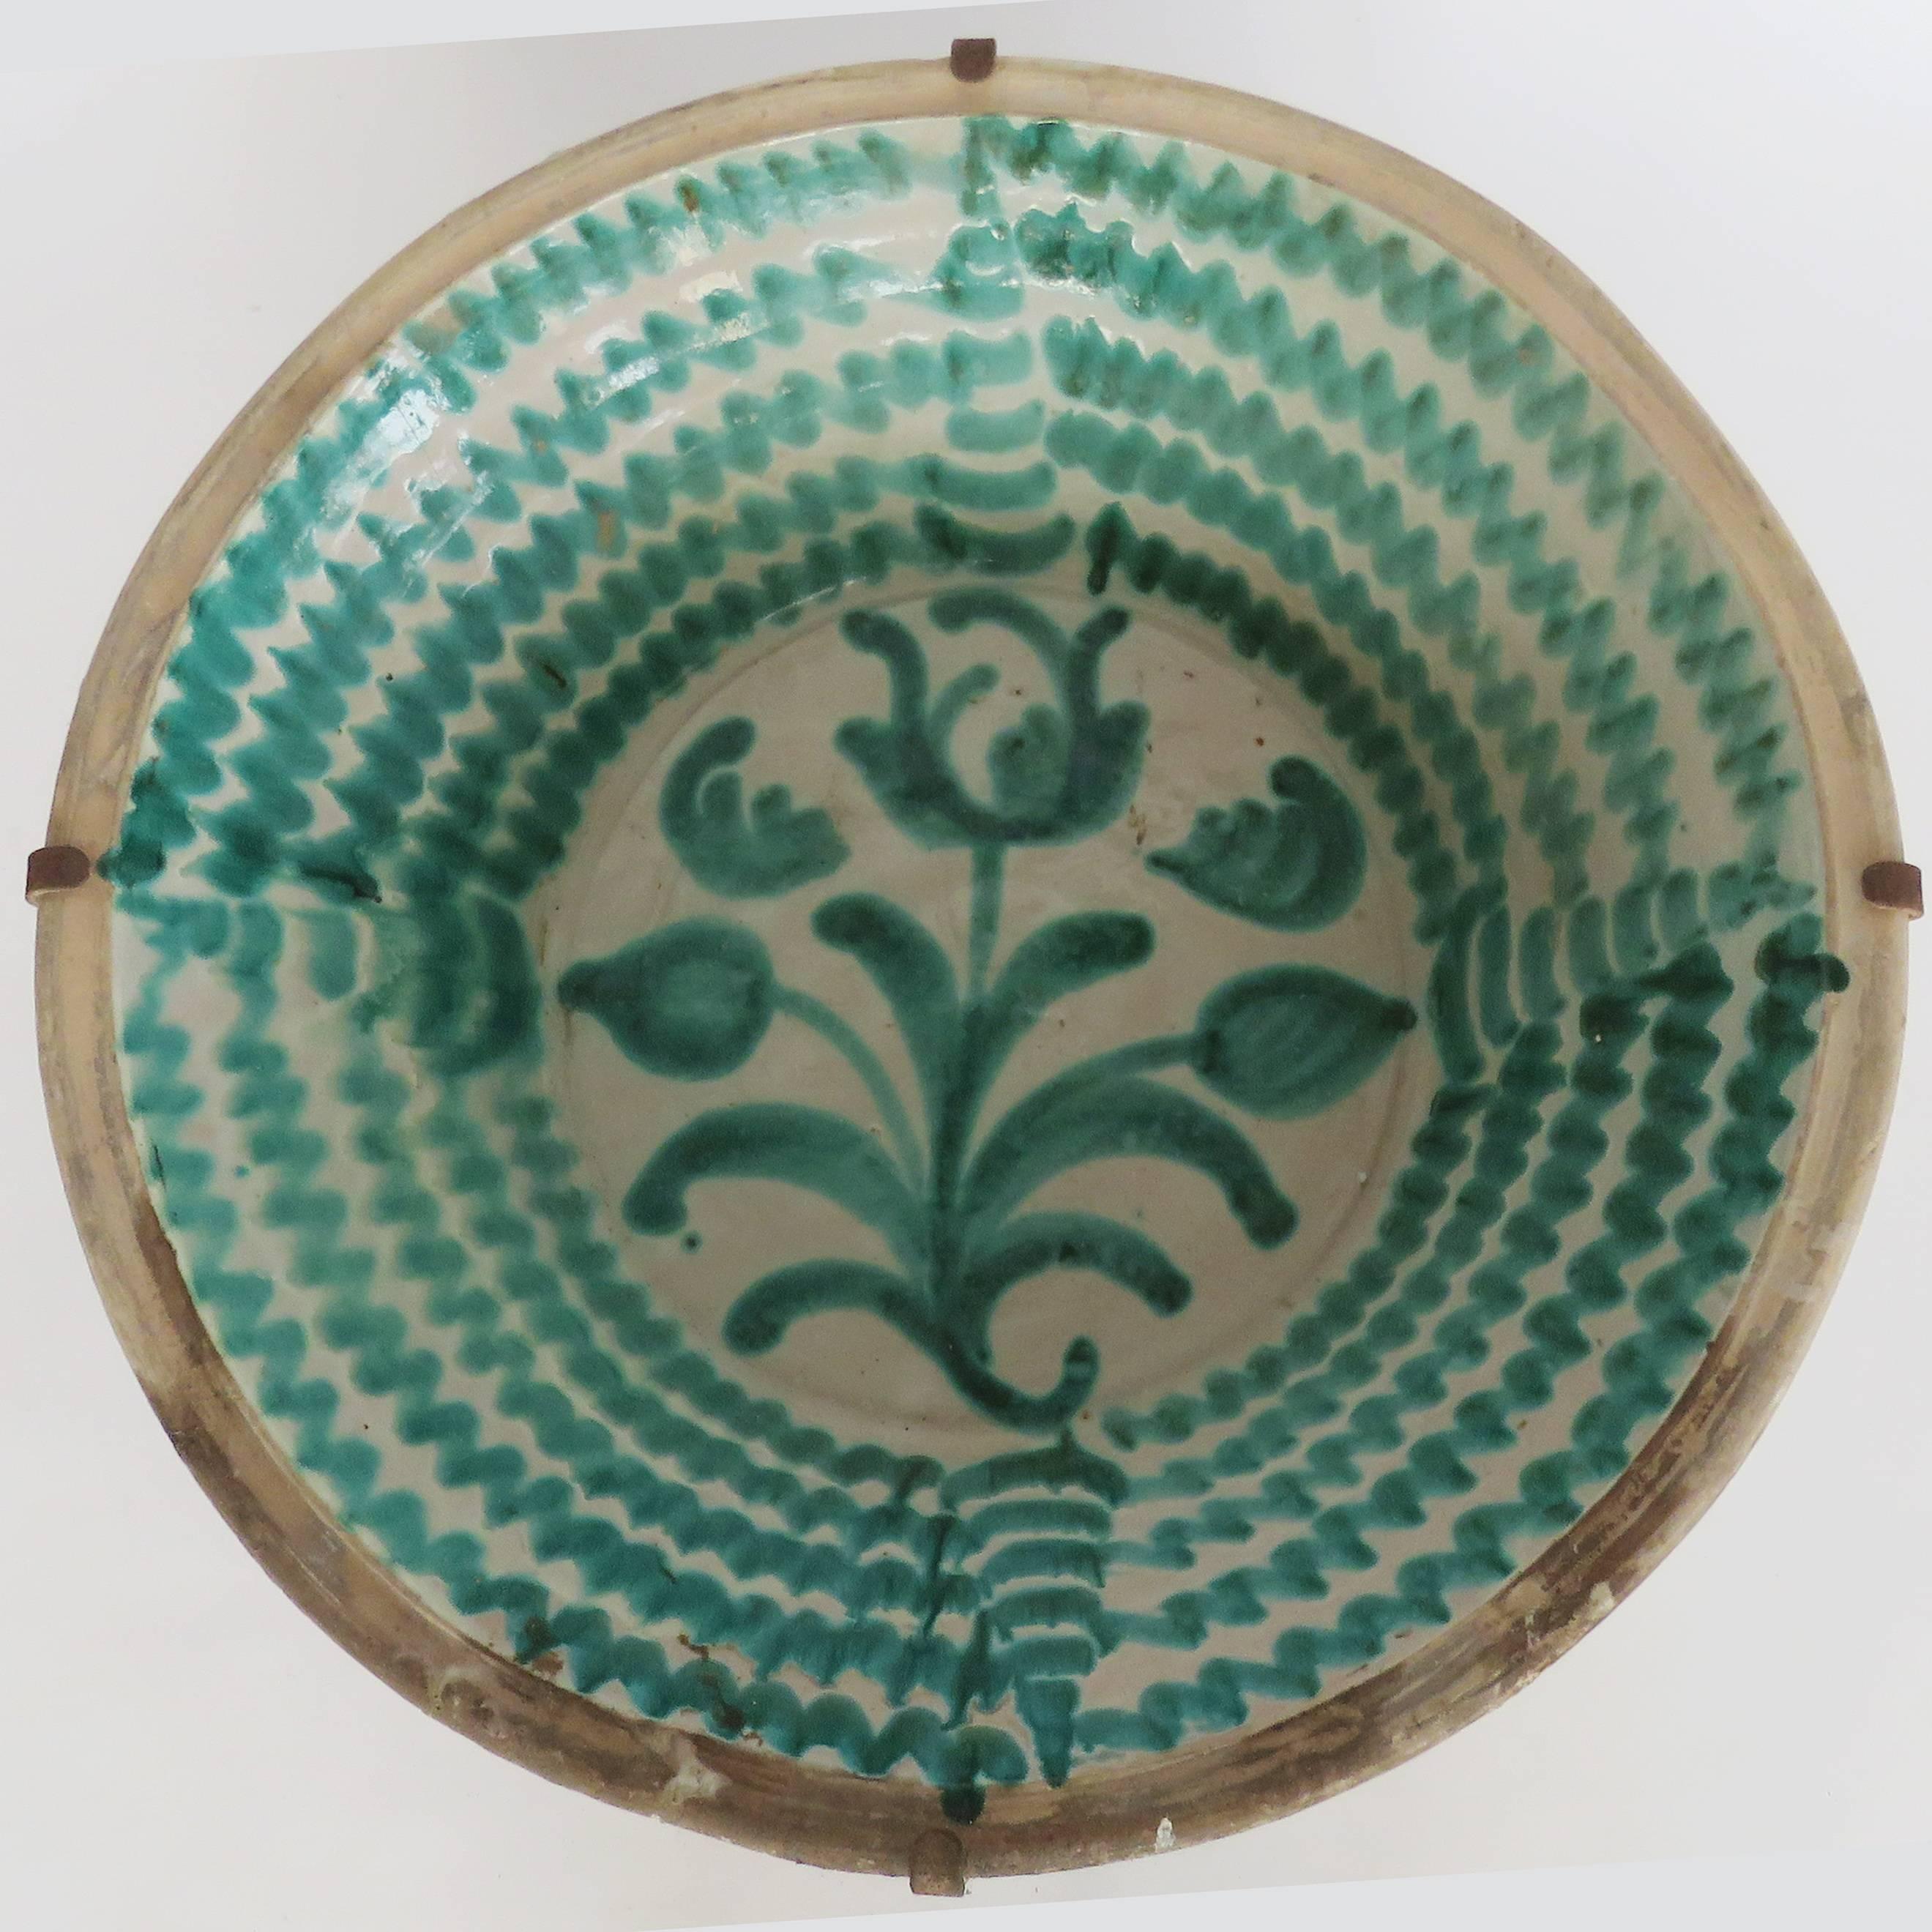 Deep green glaze over a milky white slip featuring a large blossoming flower surrounded by whimsical foliate motifs. Origin: Granada, Spain.

Back iron hooks included.